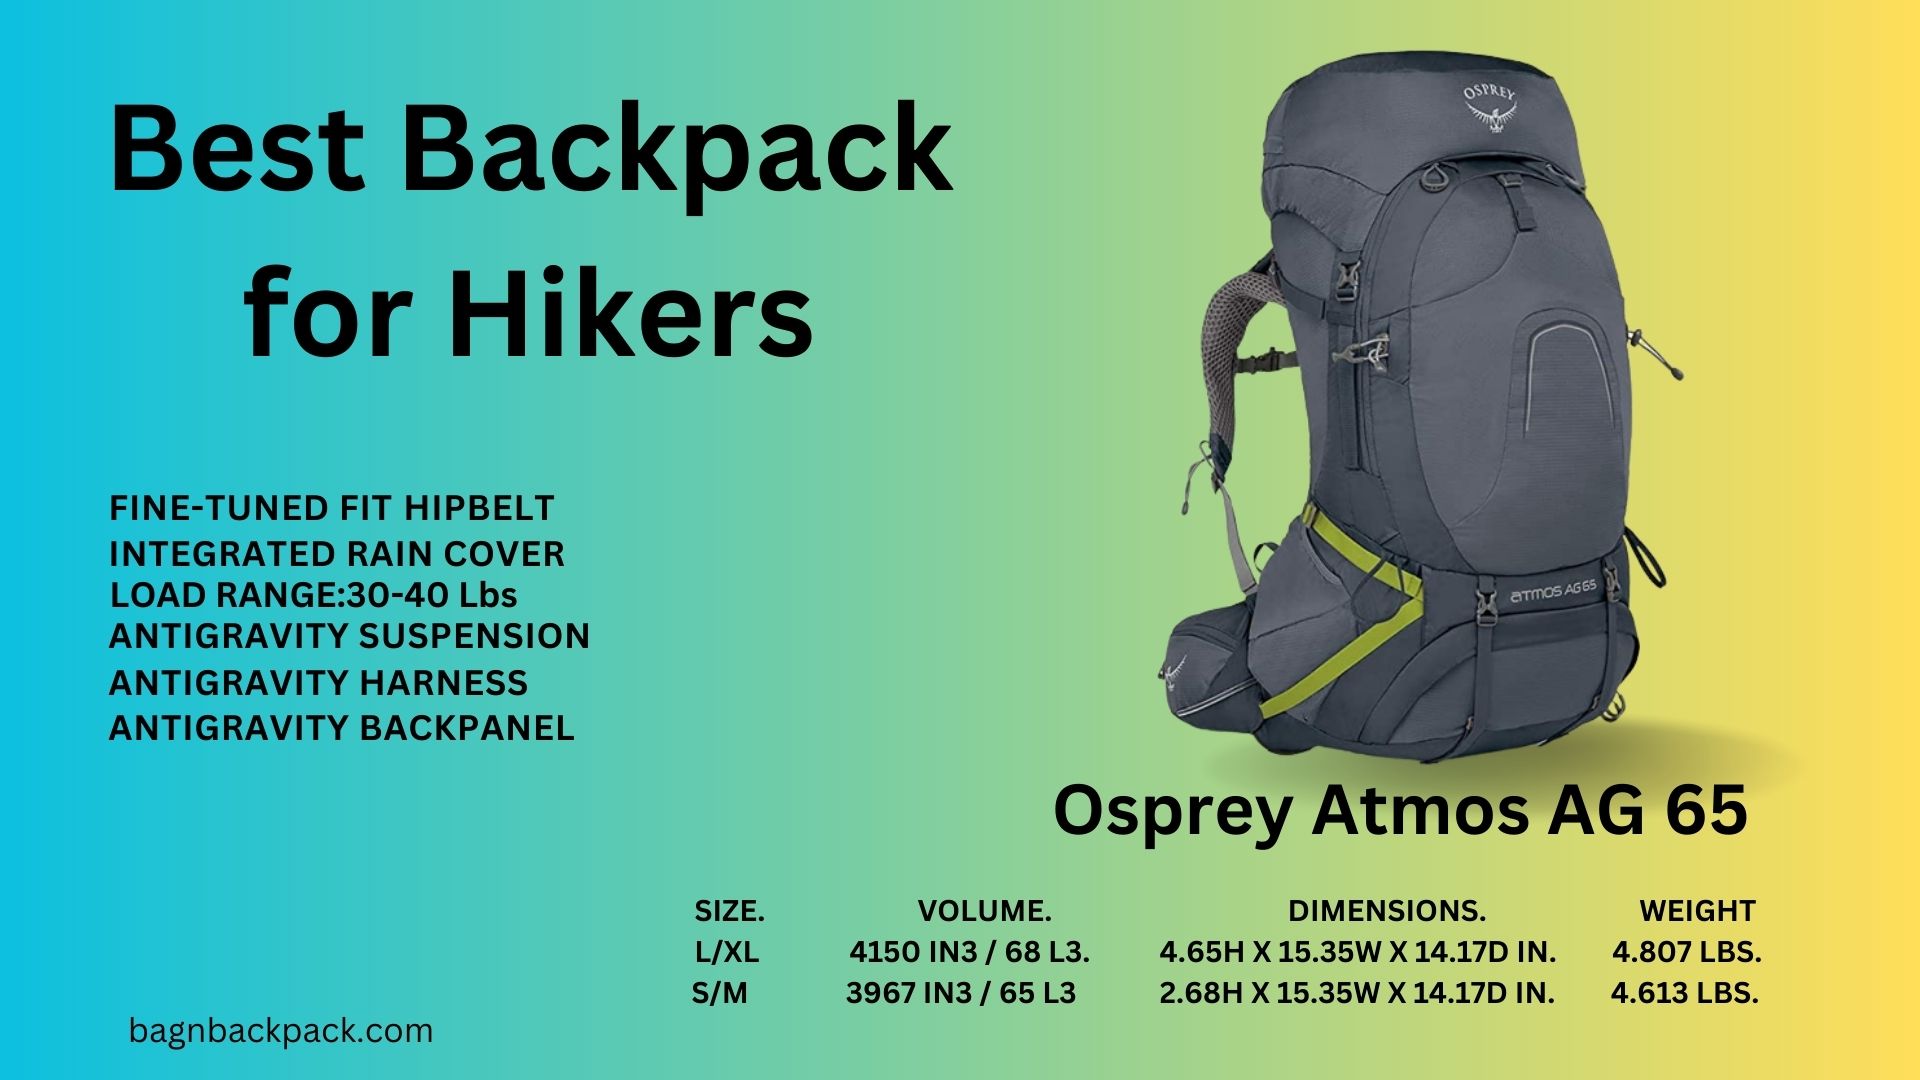 Best Backpack for Hikers